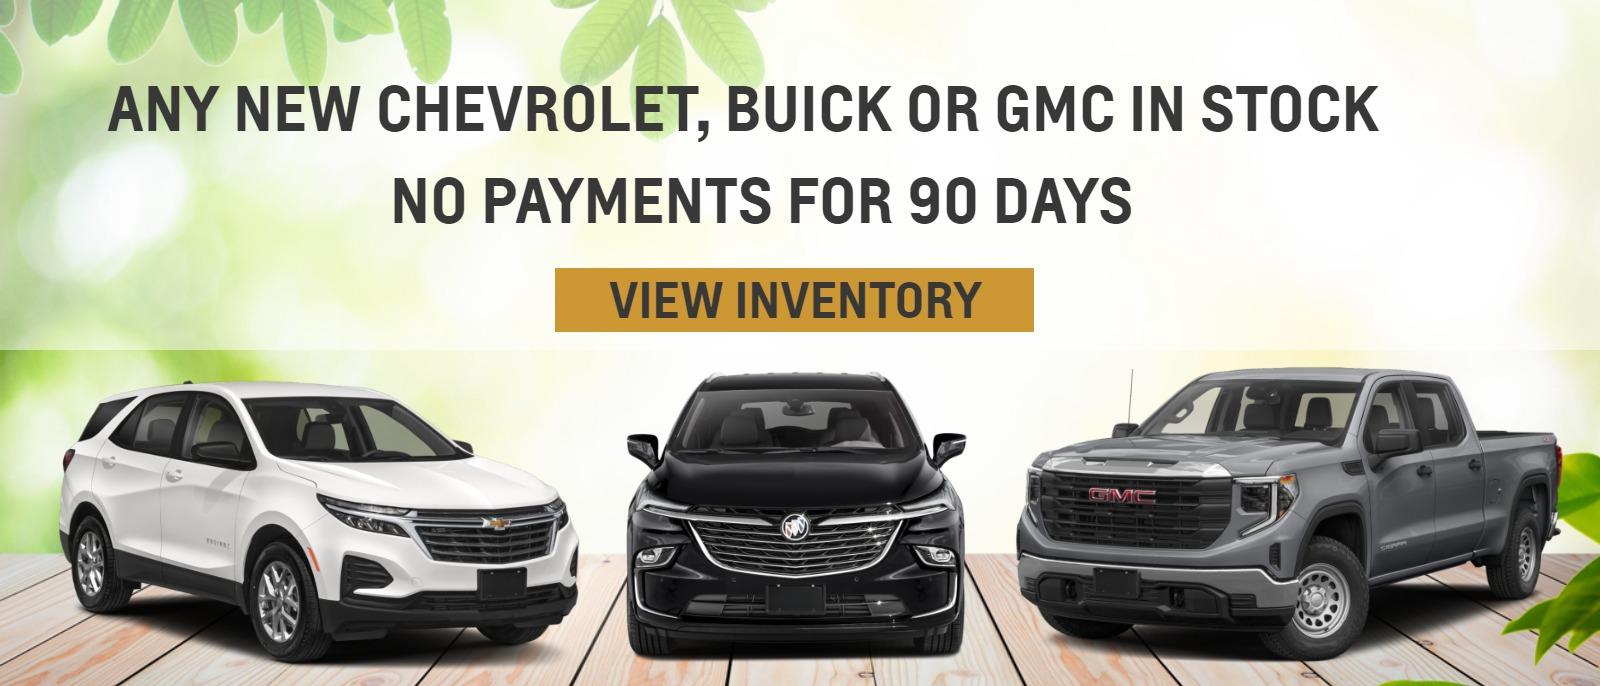 Any new Chevrolet, Buick or GMC in stock


No pymts for 90 days